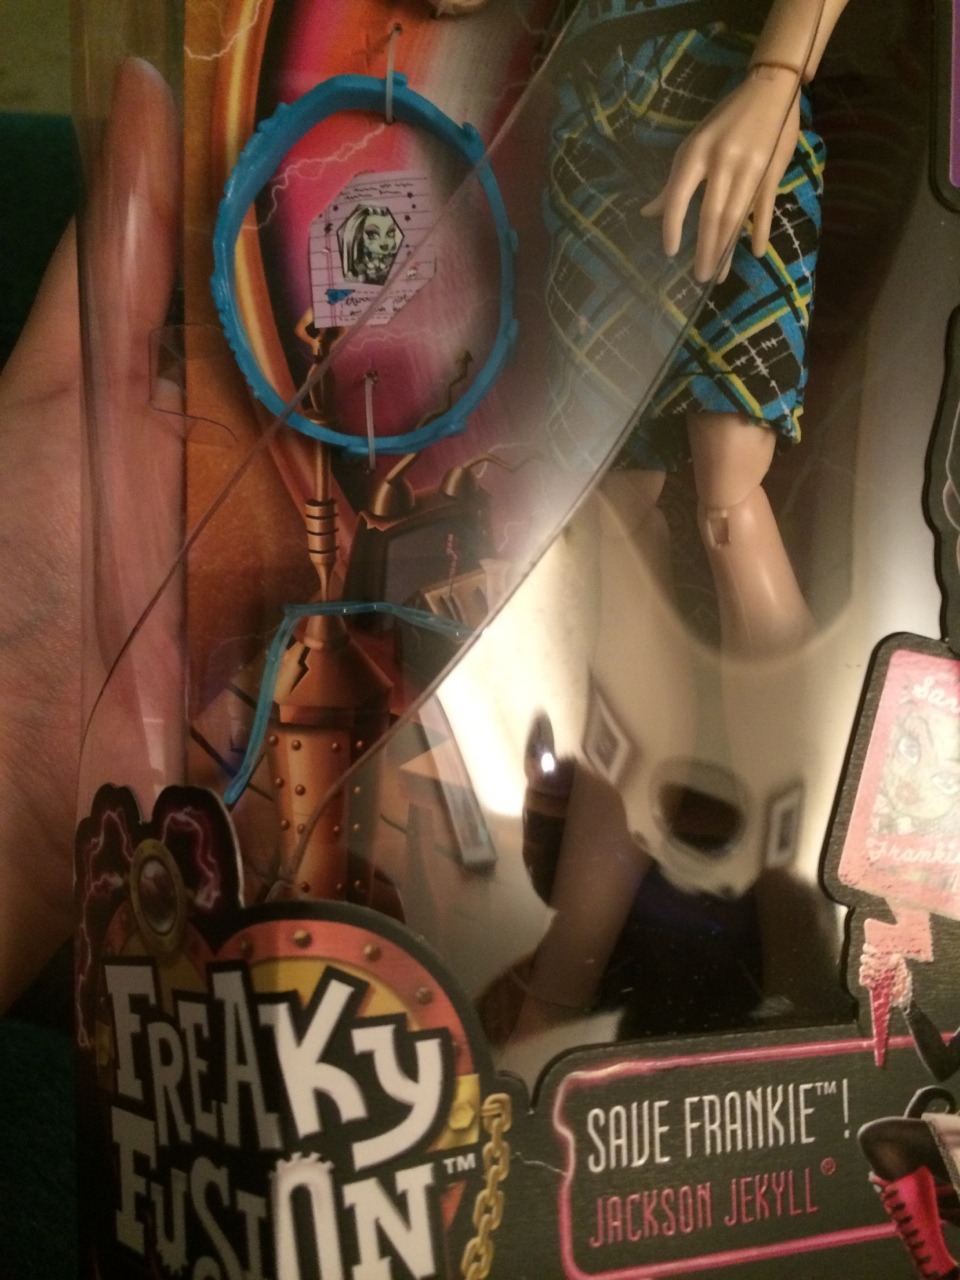 confessionsofamonsterhighaddict:

NEW FREAKY FUSION LINE

FOUND IN K-MART AUSTRALIA

LINE IS CALLED SAVE FRANKIE

CONSISTS OF DRACULAURA, CLAWDEEN AND JACKSON

PICTURED JACKSON JEKYLL